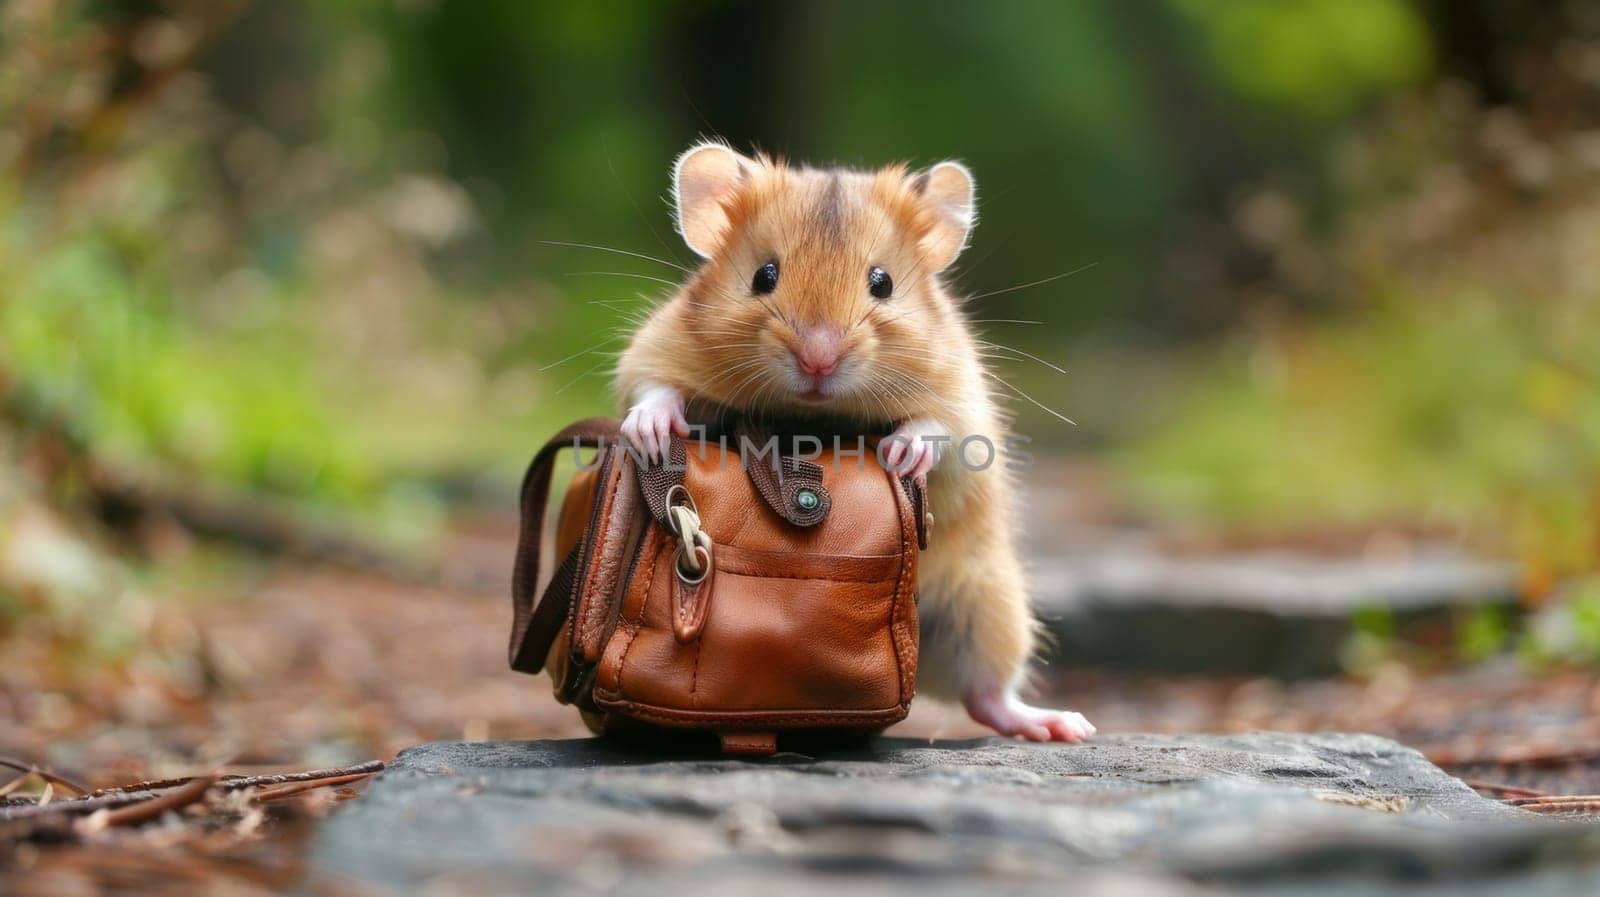 A small brown and white hamster with a purse on its back, AI by starush